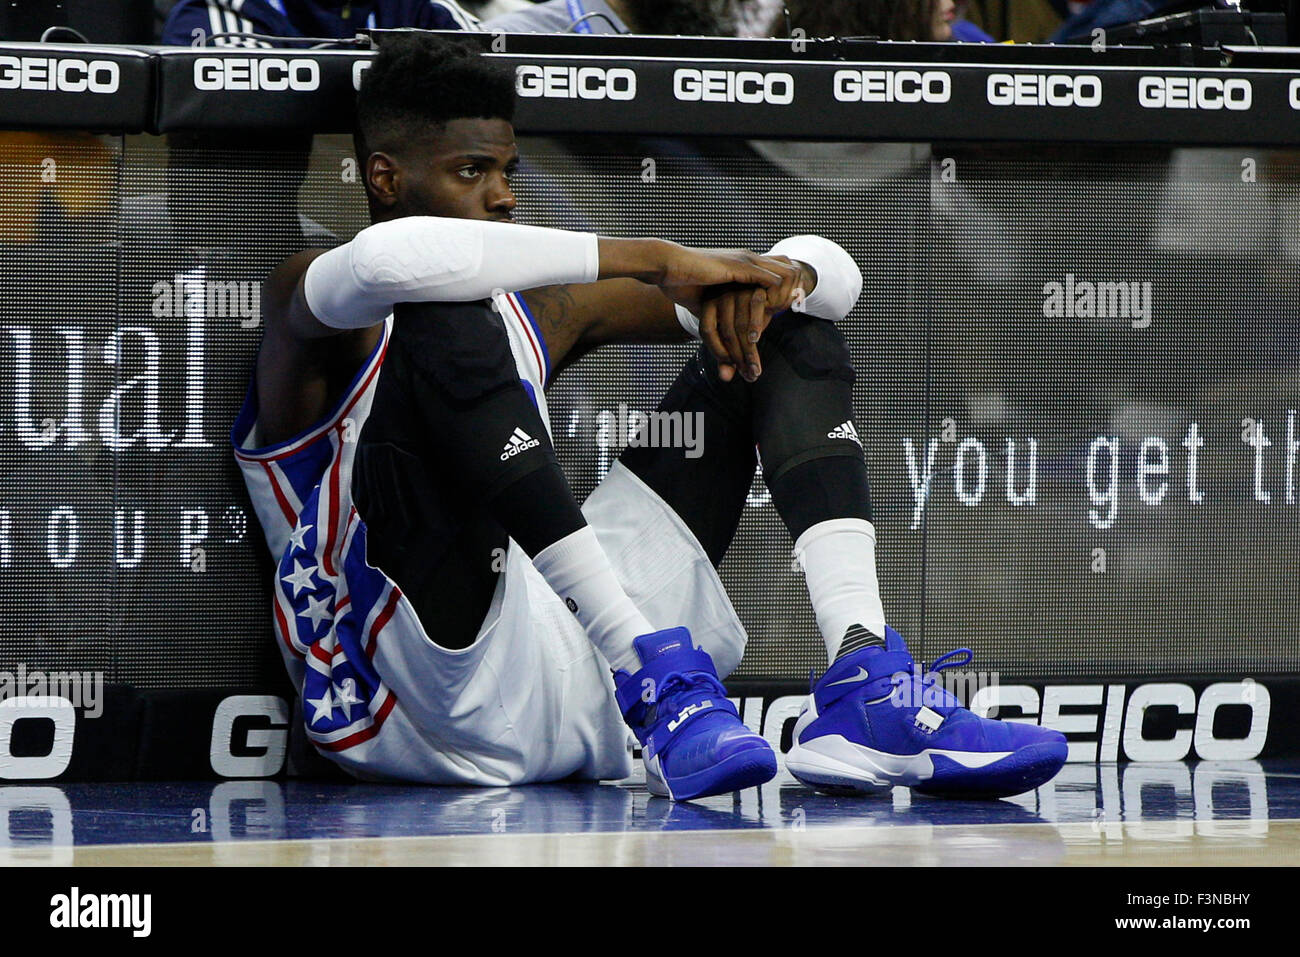 October 8, 2015: Philadelphia 76ers center Nerlens Noel (4) looks on by the scorers table during the NBA game between the Cleveland Cavaliers and the Philadelphia 76ers at the Wells Fargo Center in Philadelphia, Pennsylvania. The Philadelphia 76ers won 115-114. Christopher Szagola/CSM Stock Photo